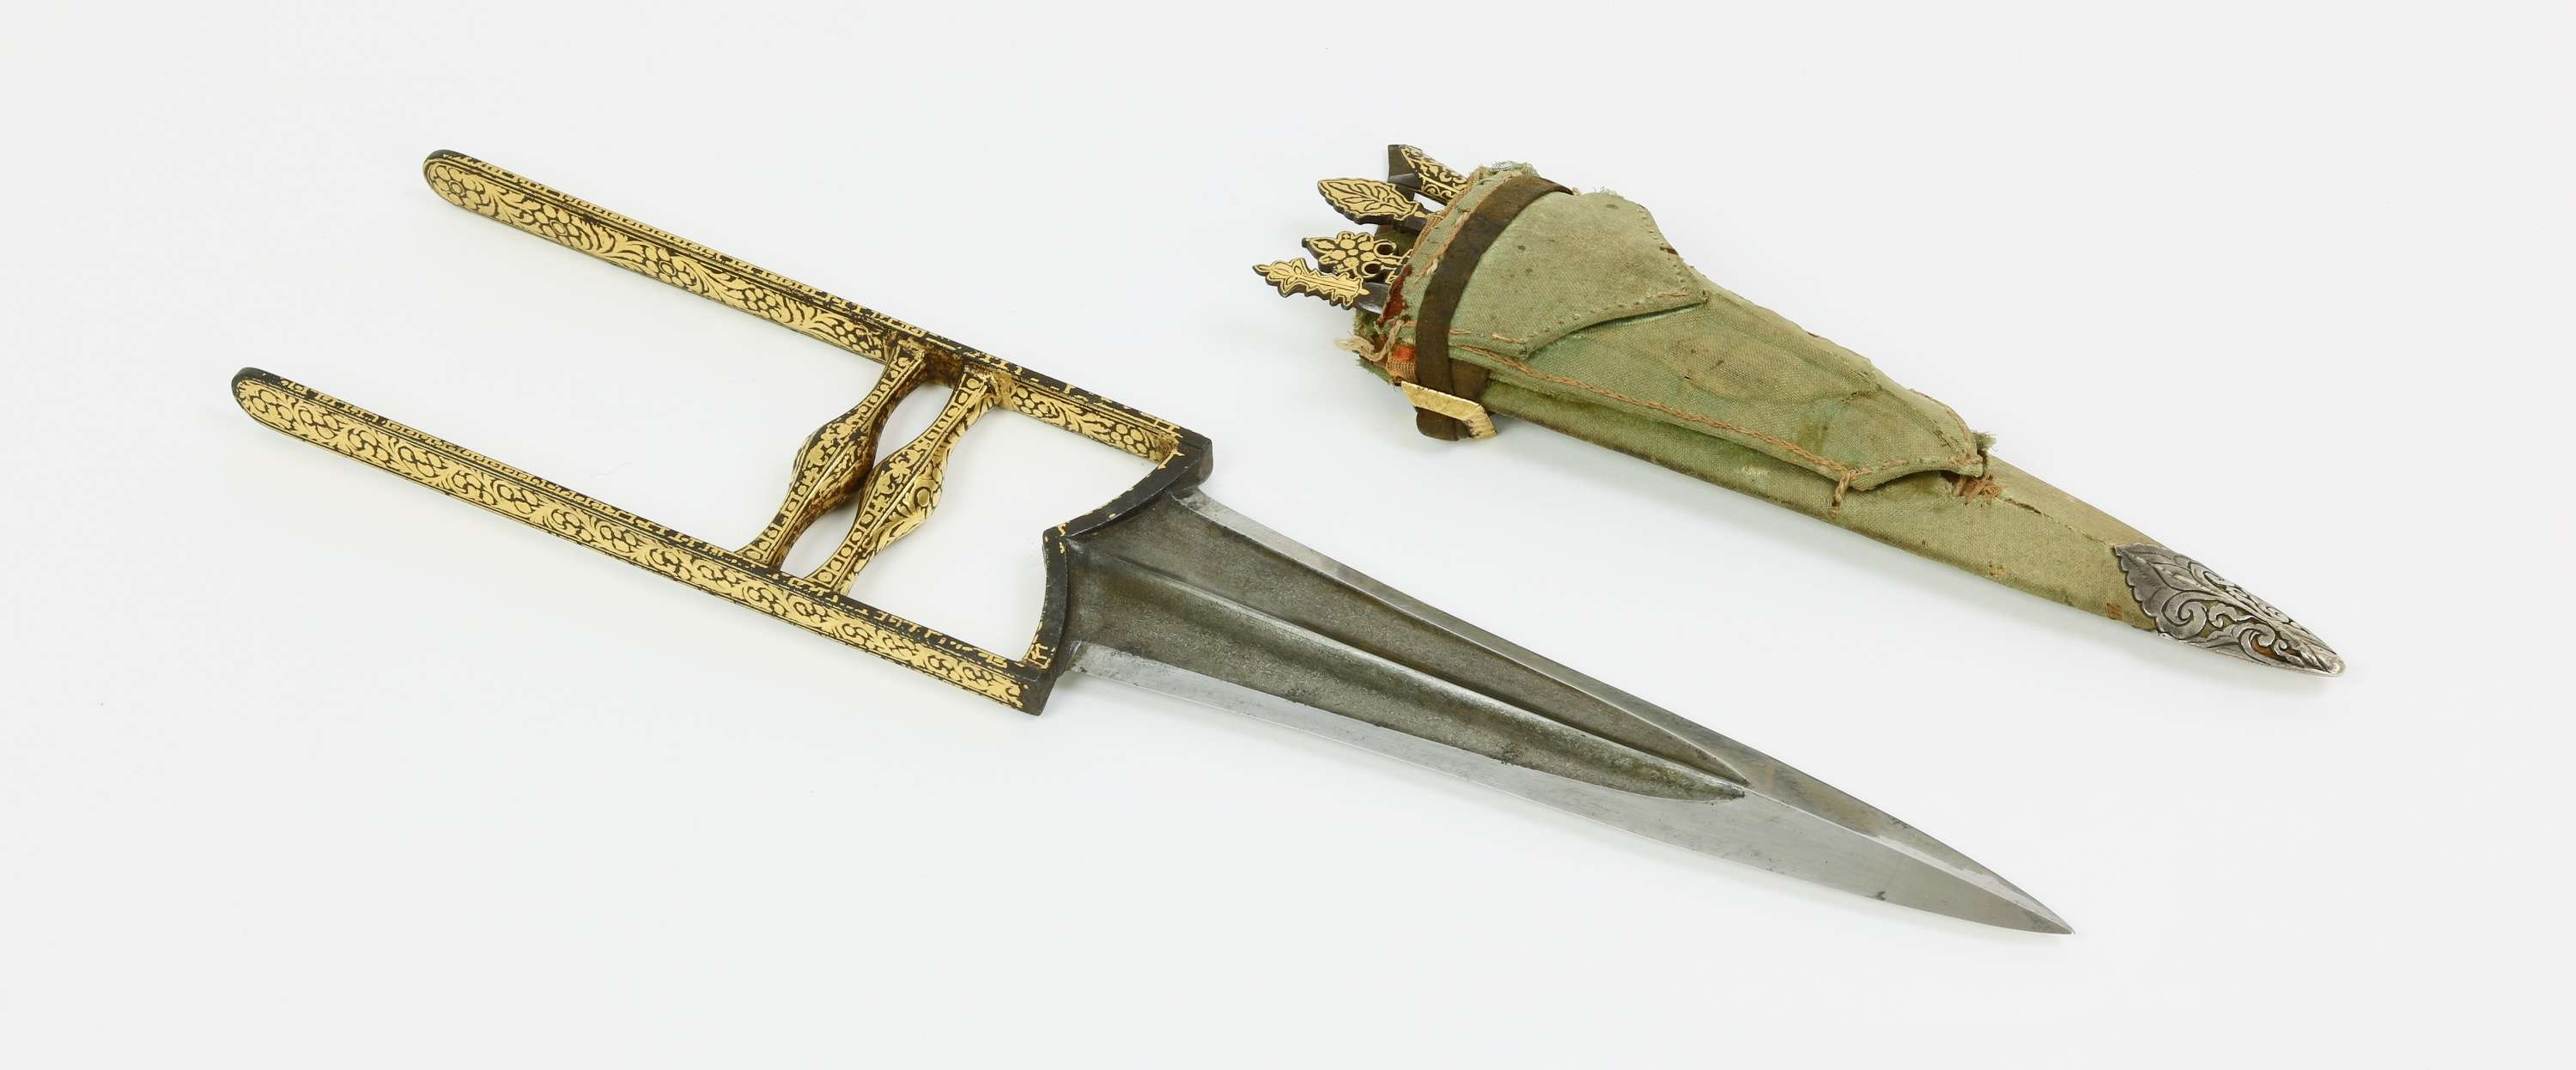 North Indian katar with tools